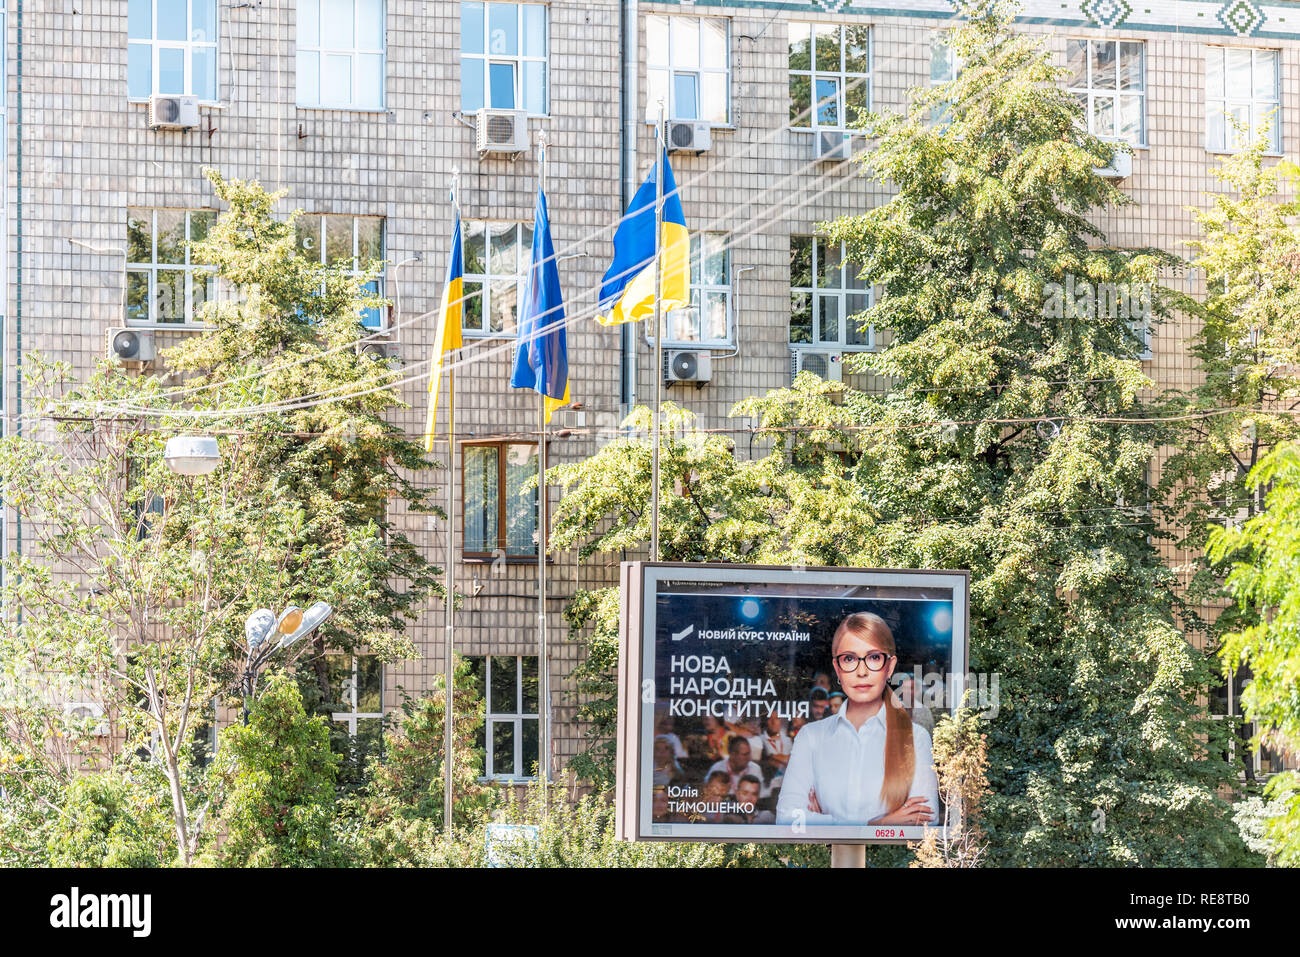 Kyiv, Ukraine - August 11, 2018: Political advertisement ad banner sign for Yulia Tymoshenko for president by street road in Kiev downtown city with U Stock Photo